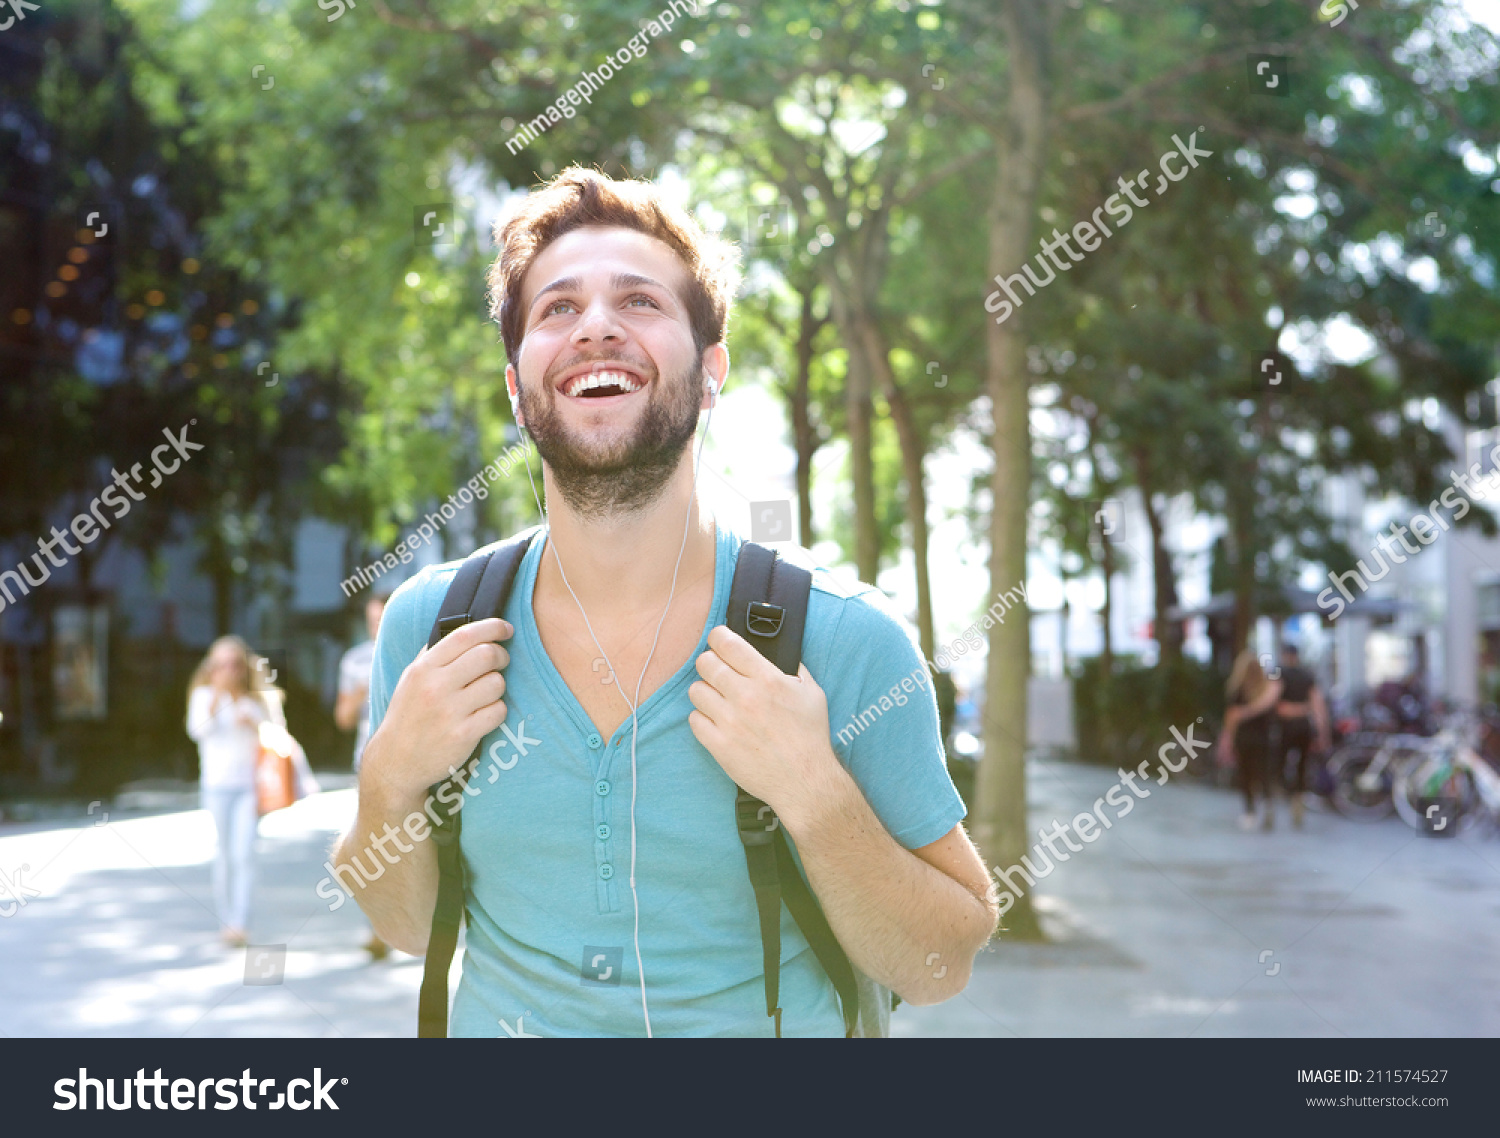 Close up portrait of a handsome young man walking outdoors with backpack #211574527